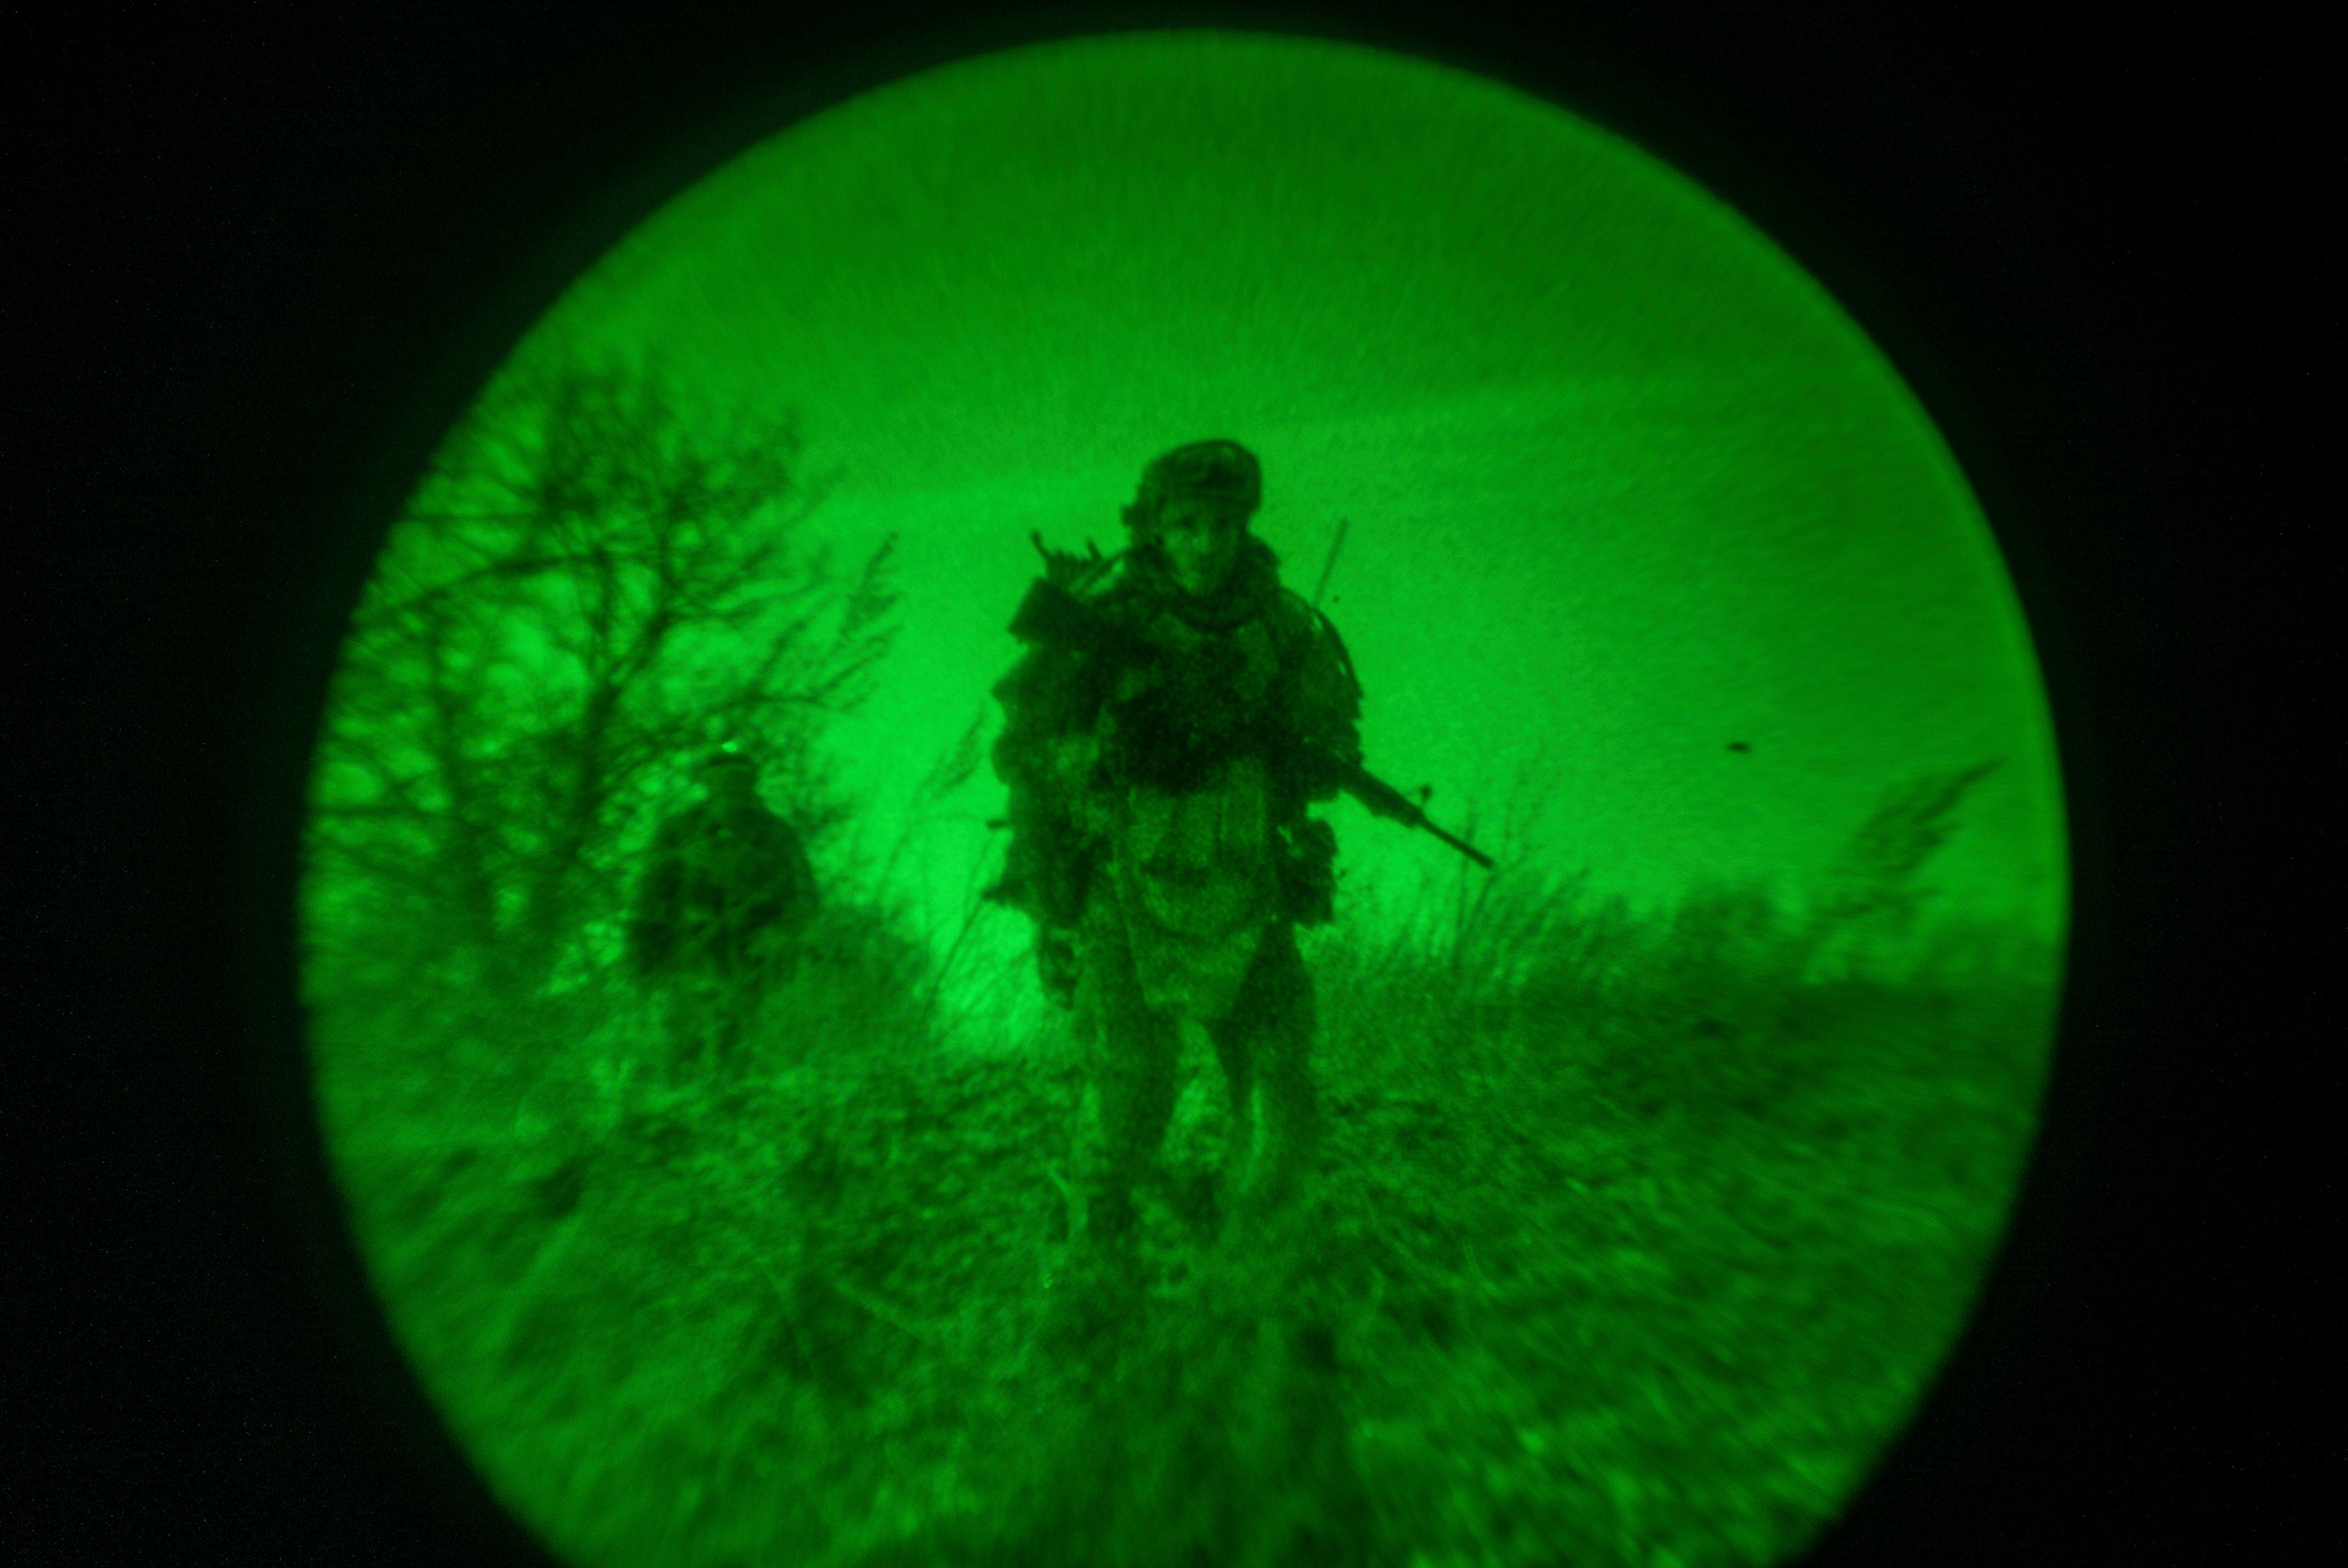 Ukrainian servicemen of the 3rd Assault brigade are seen through night vision goggles, or NVG, during a night mission on the frontline near Avdiivka last month